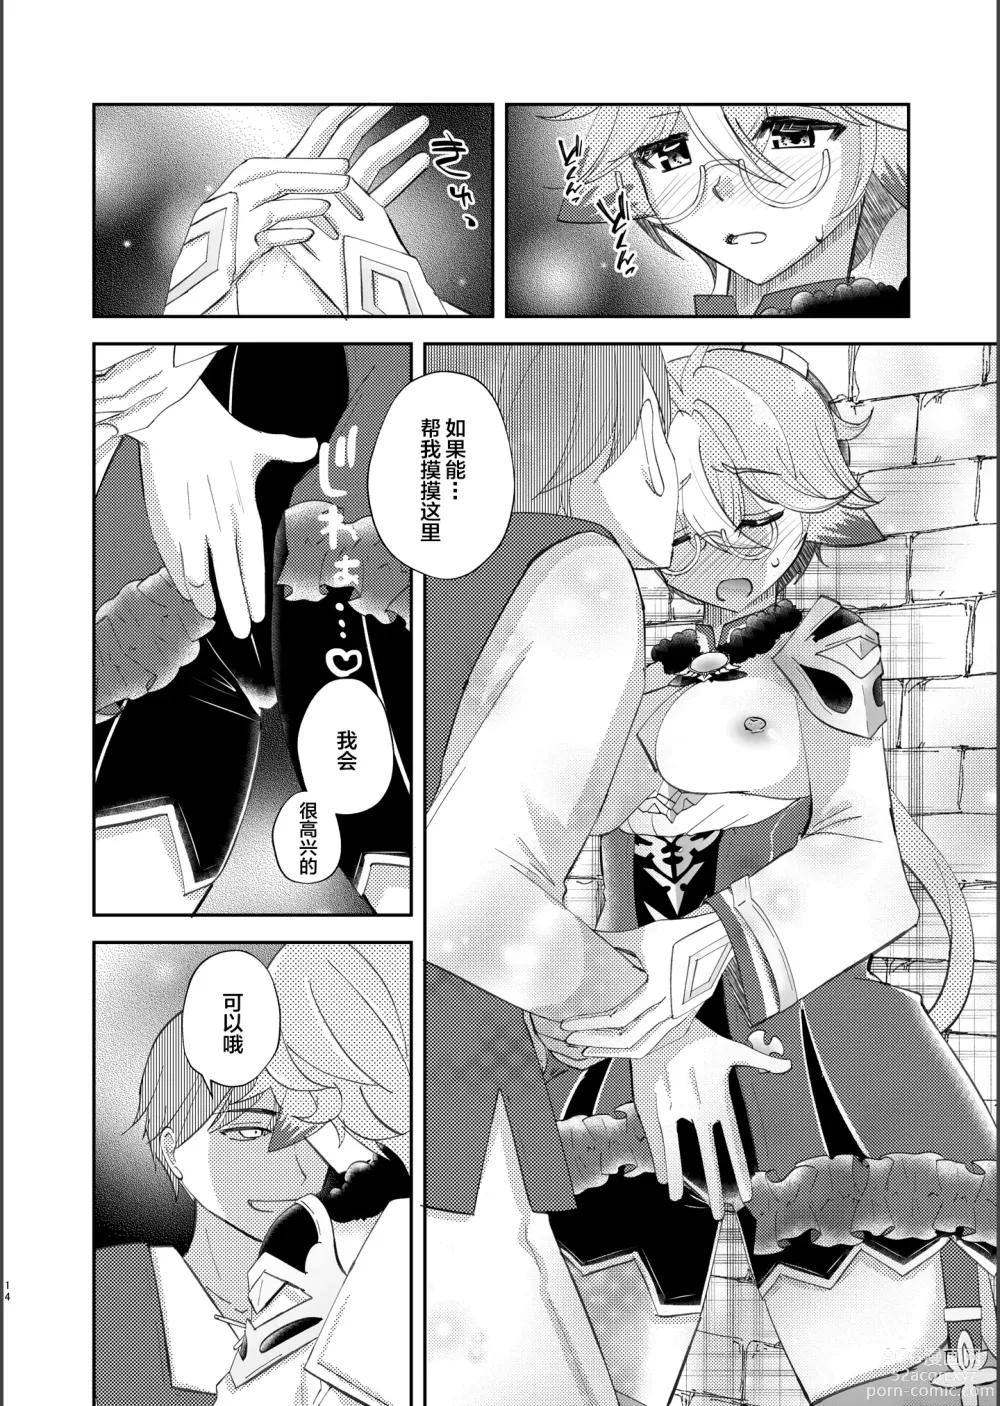 Page 13 of doujinshi repressed